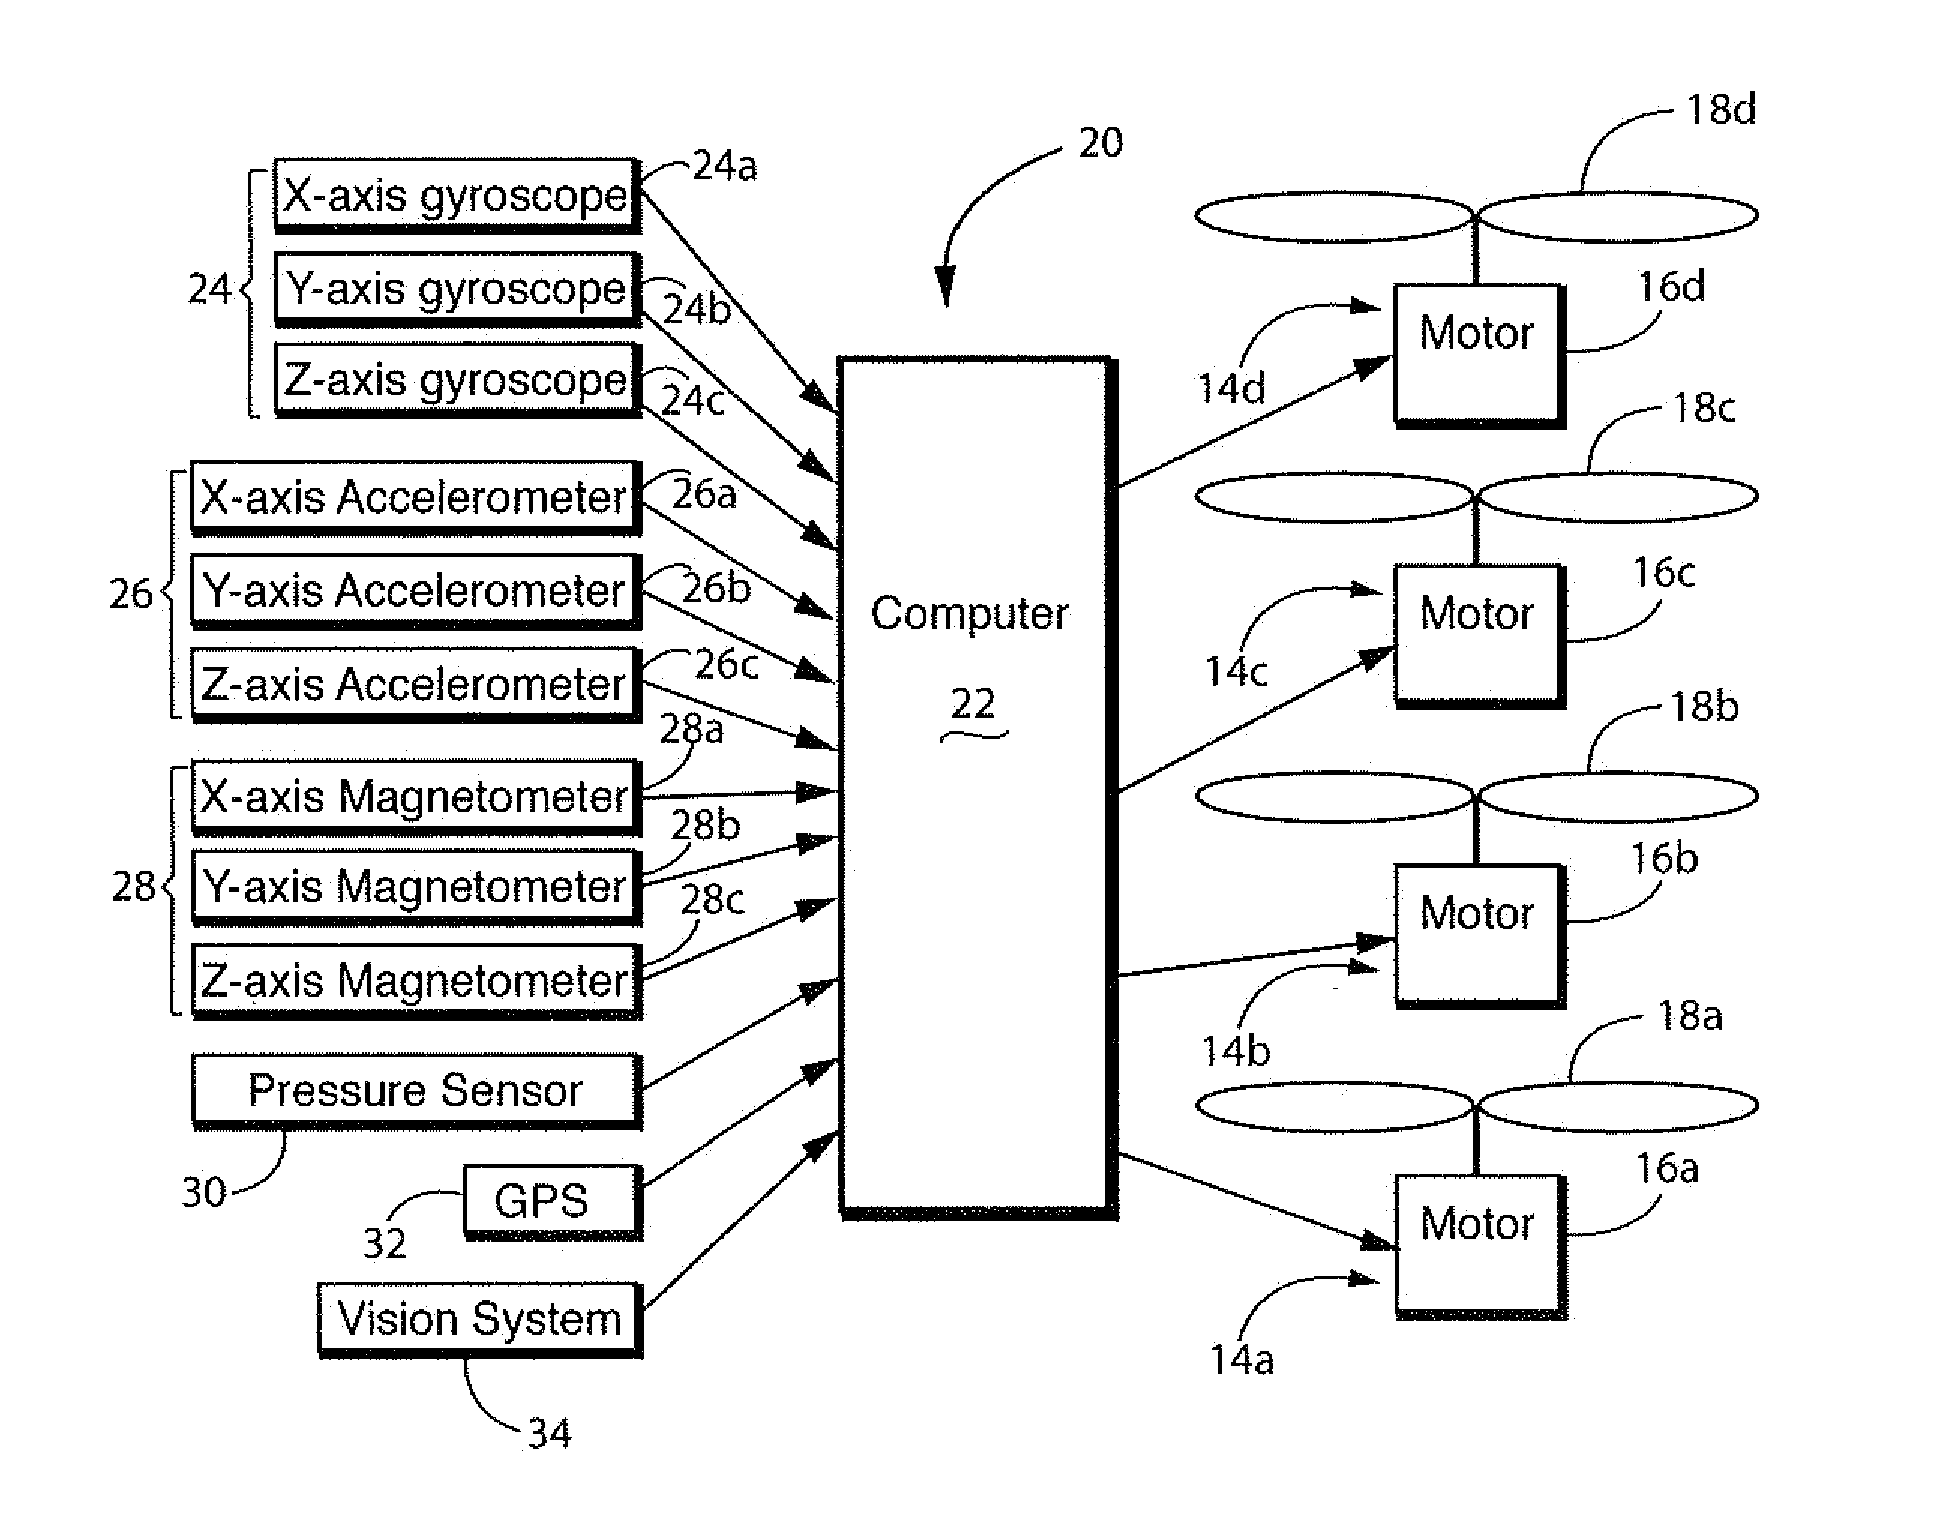 Control system for unmanned aerial vehicle utilizing parallel processing architecture